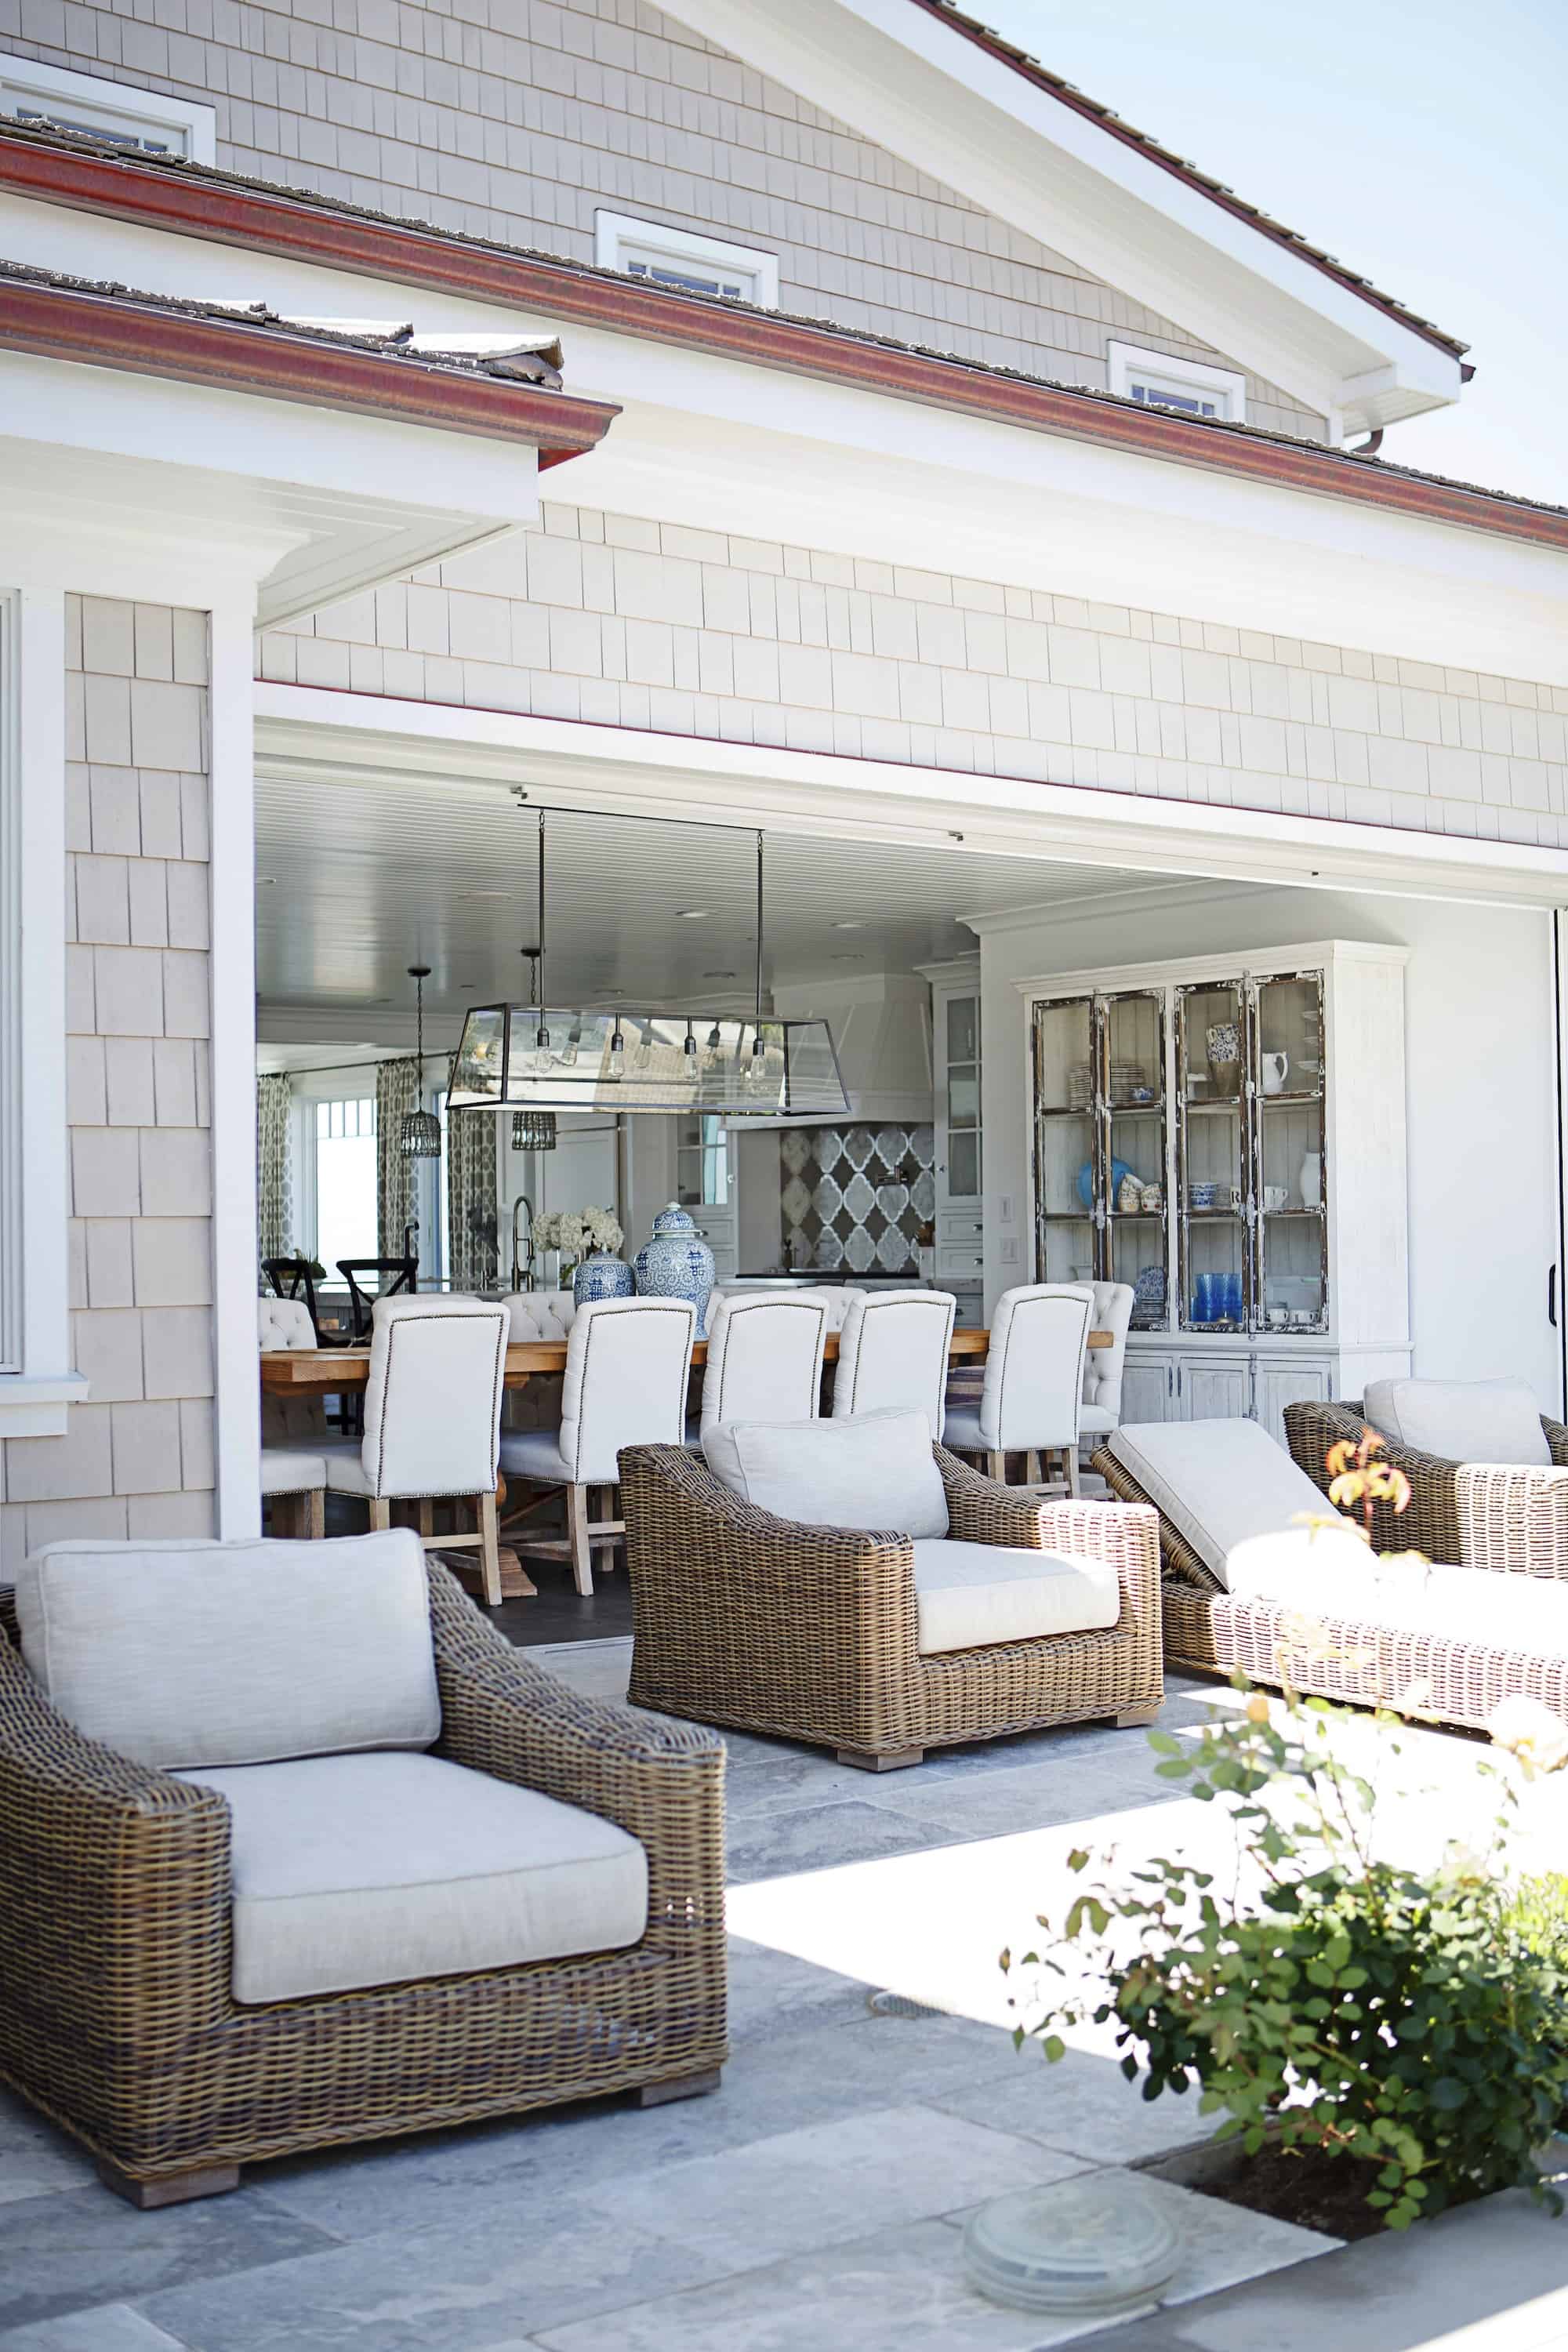 Porch and Patio Idea You’ll Want to Steal This Fall